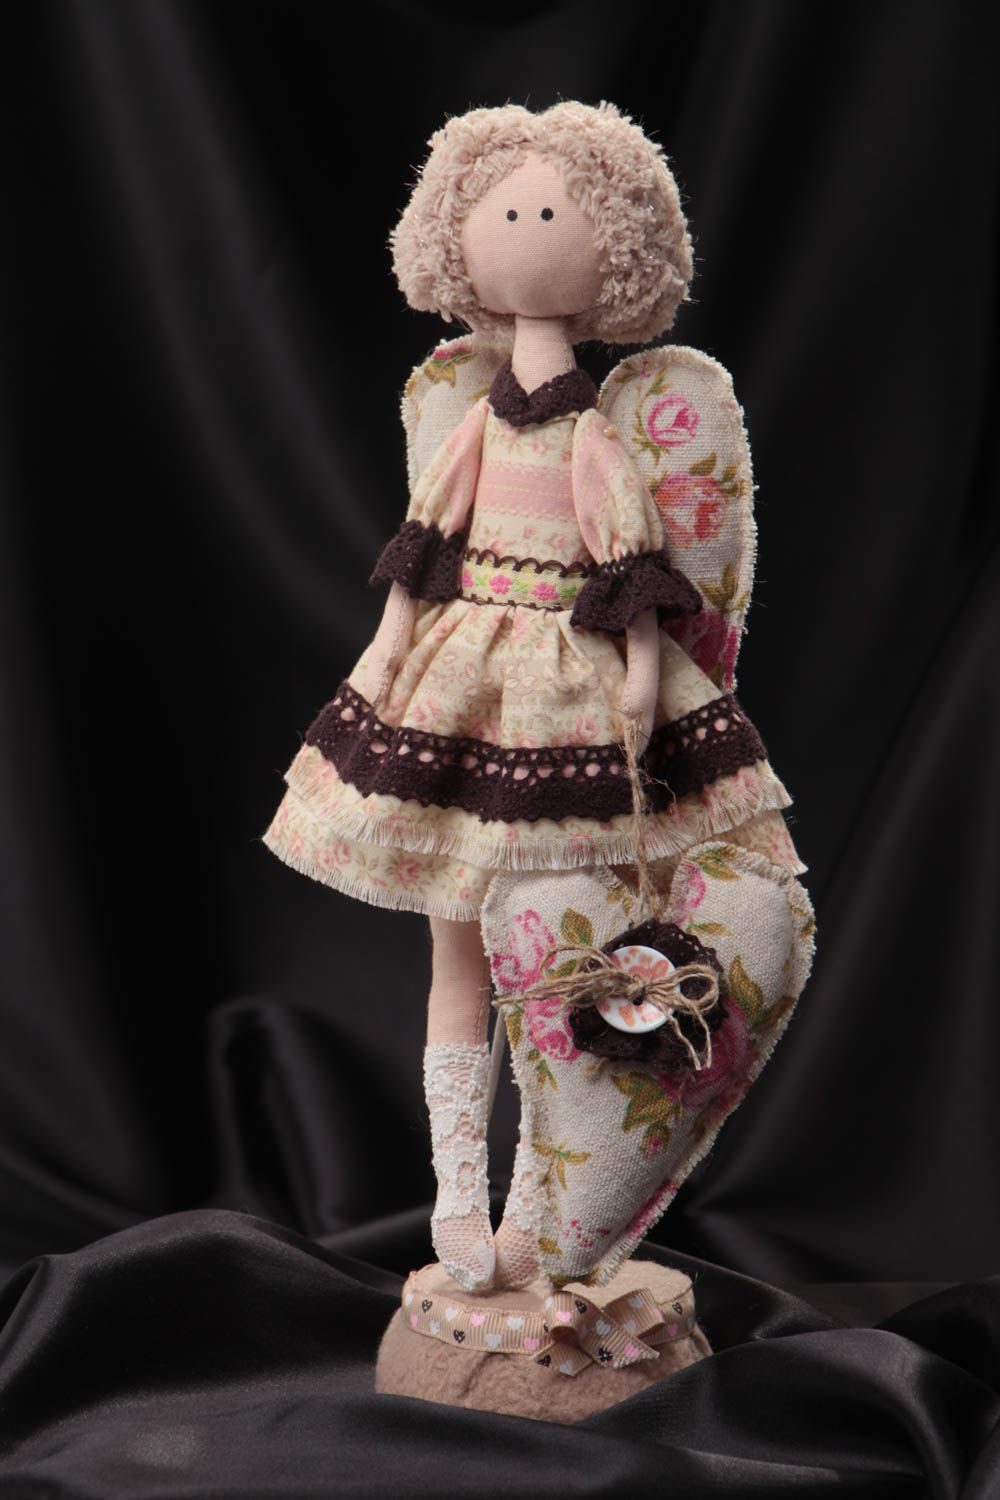 Handmade designer tender fabric soft doll in beige with floral heart and wings photo 1